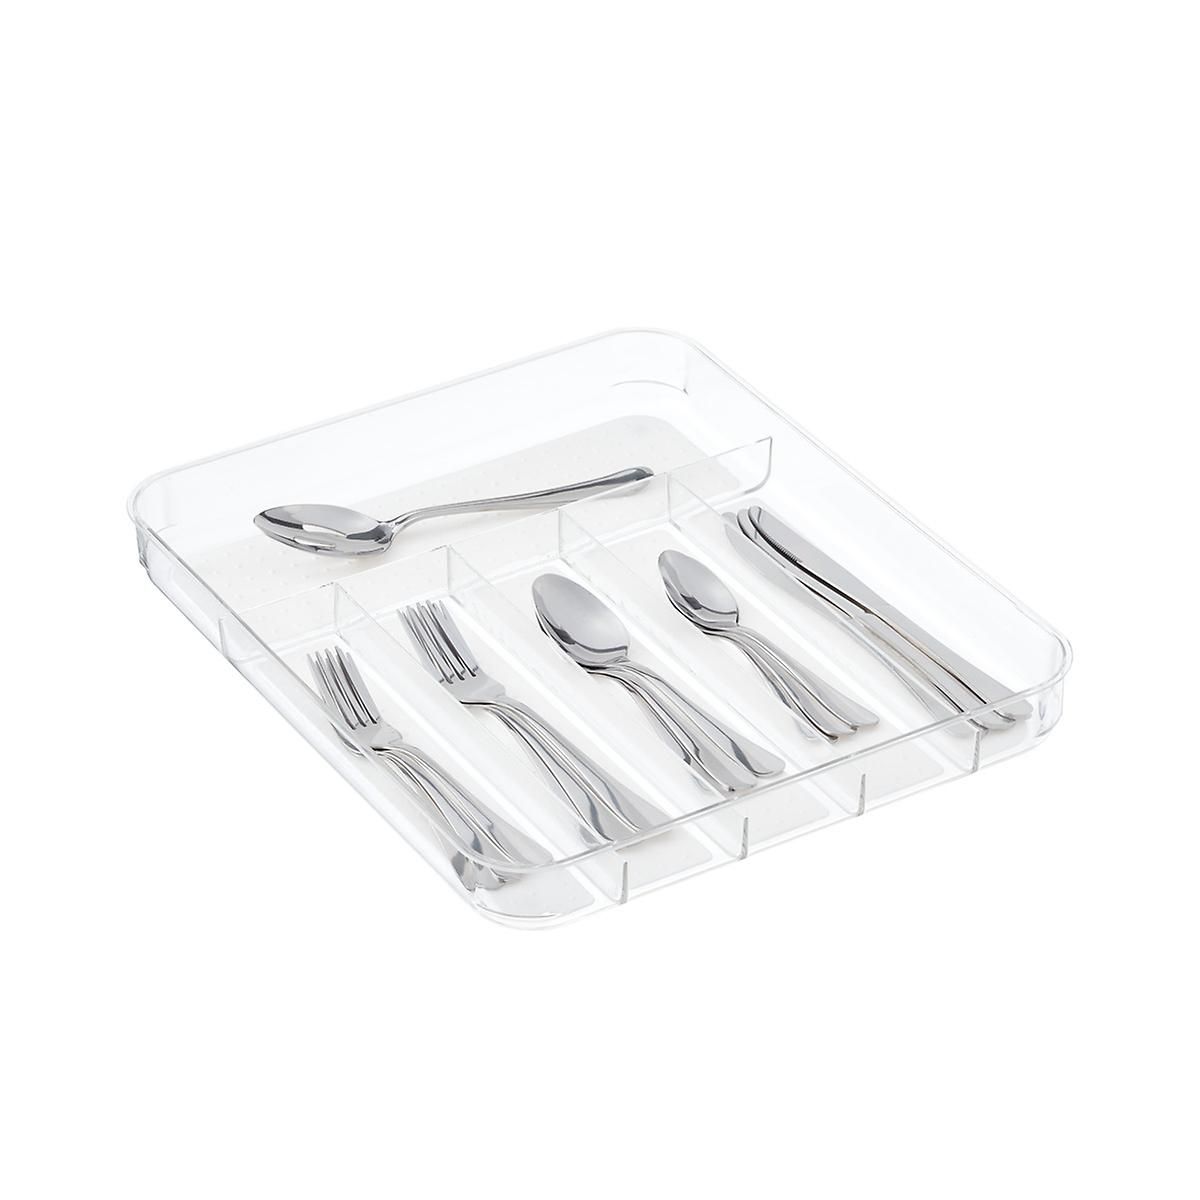 madesmart Cutlery Tray | The Container Store